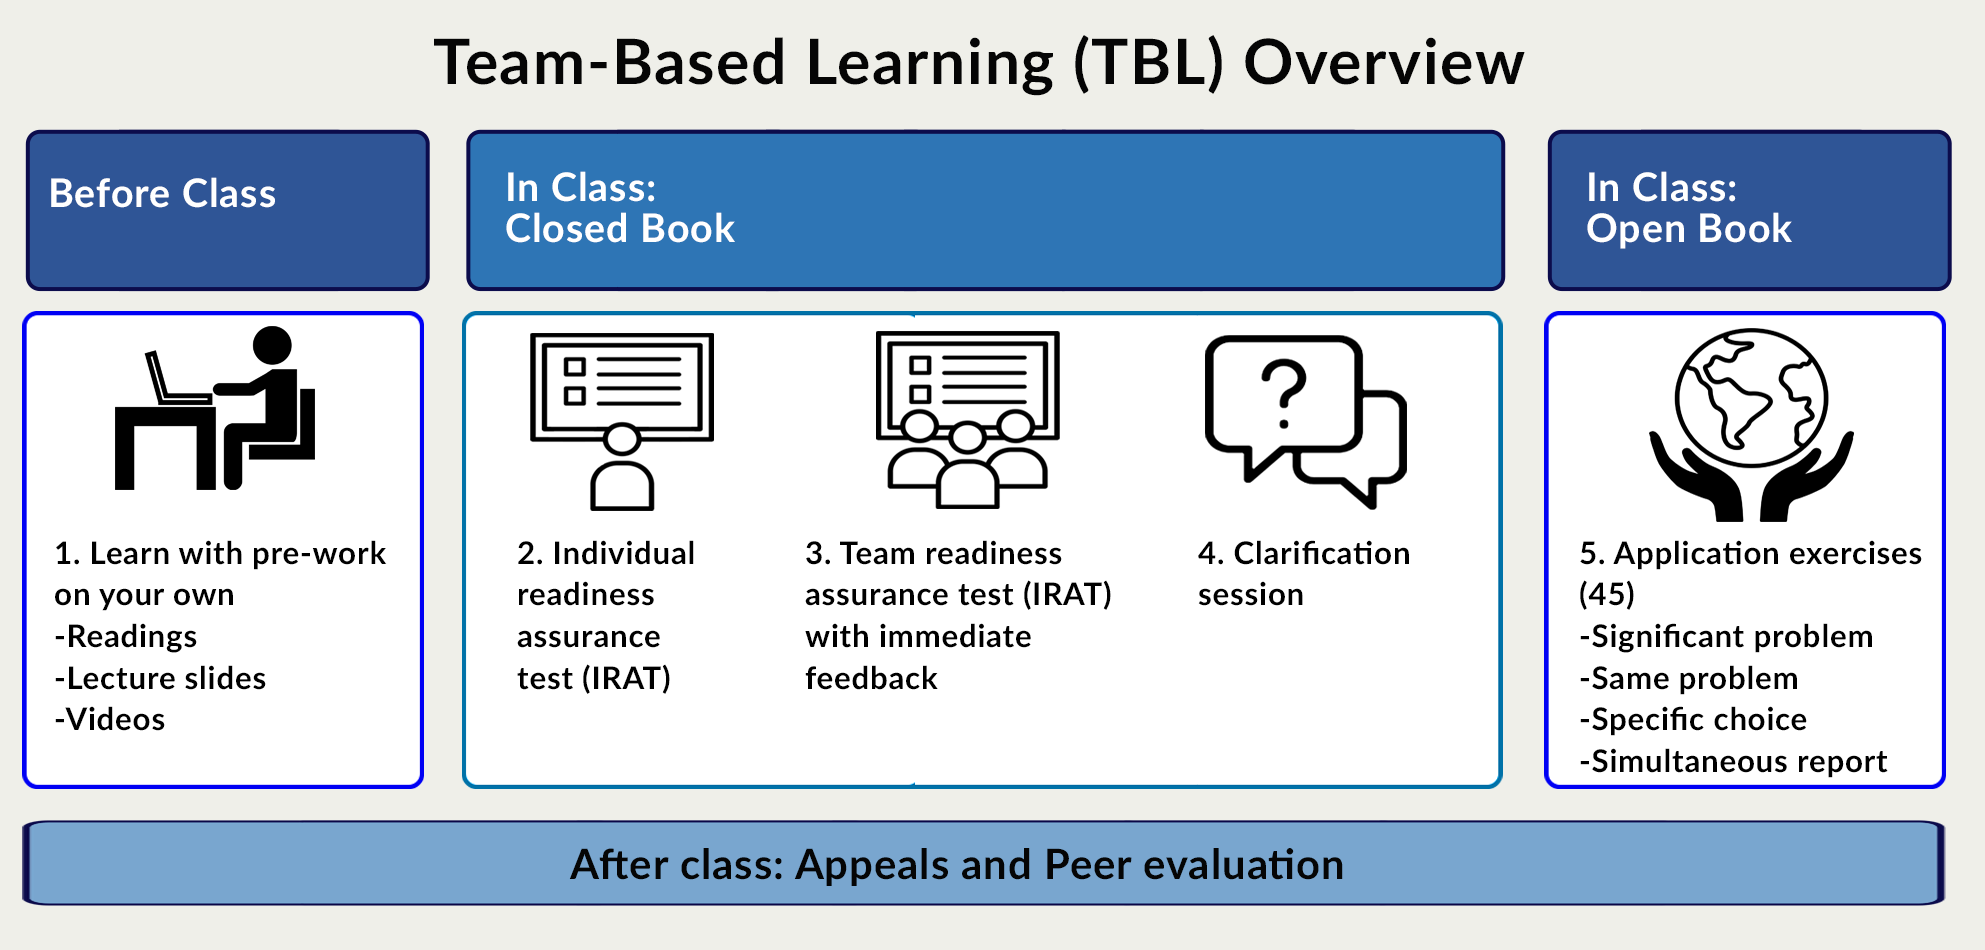 TBL-Overview chart